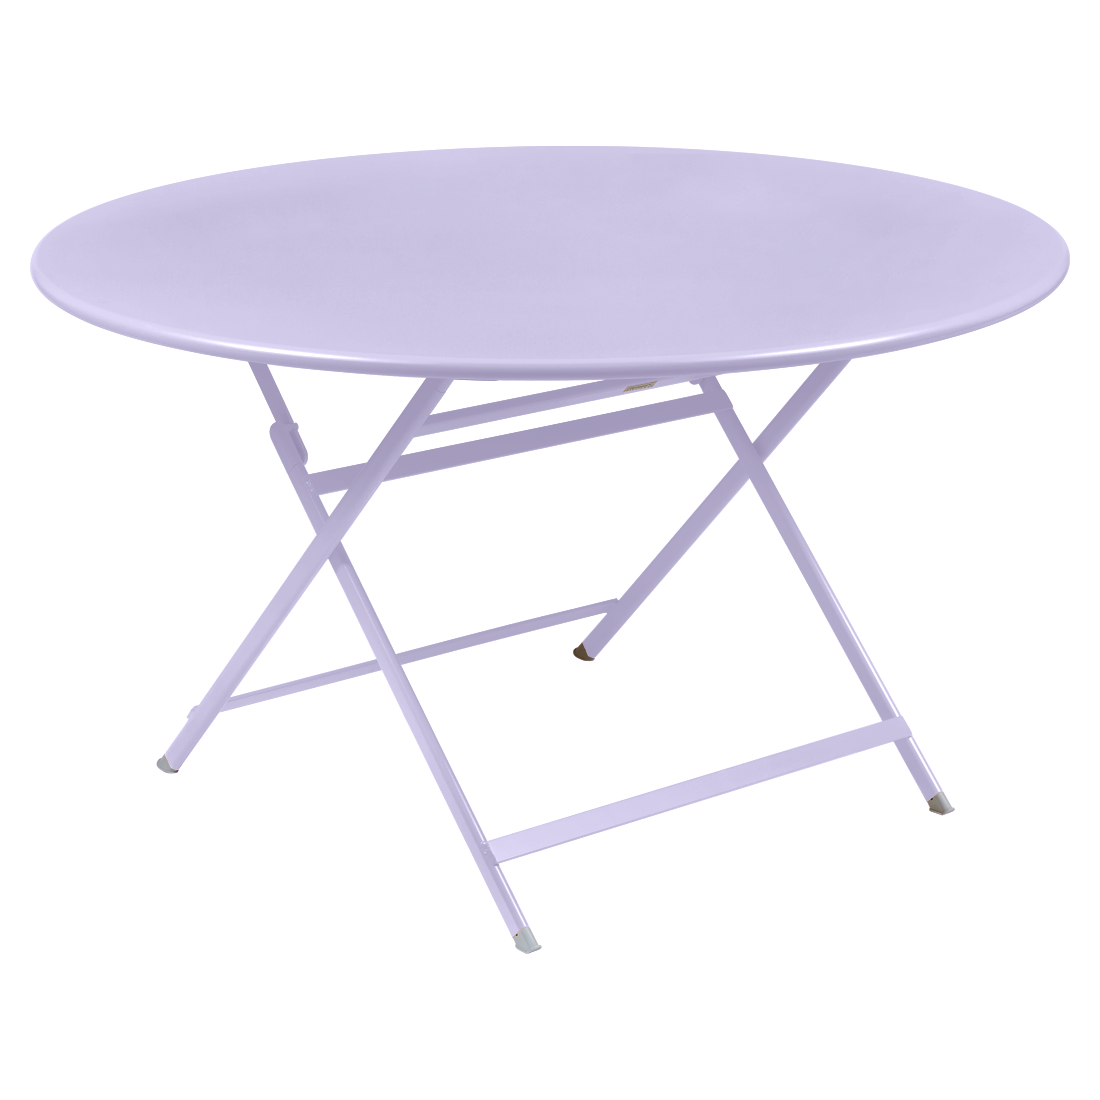 CARACTERE FOLDING TABLE ROUND 128 CM